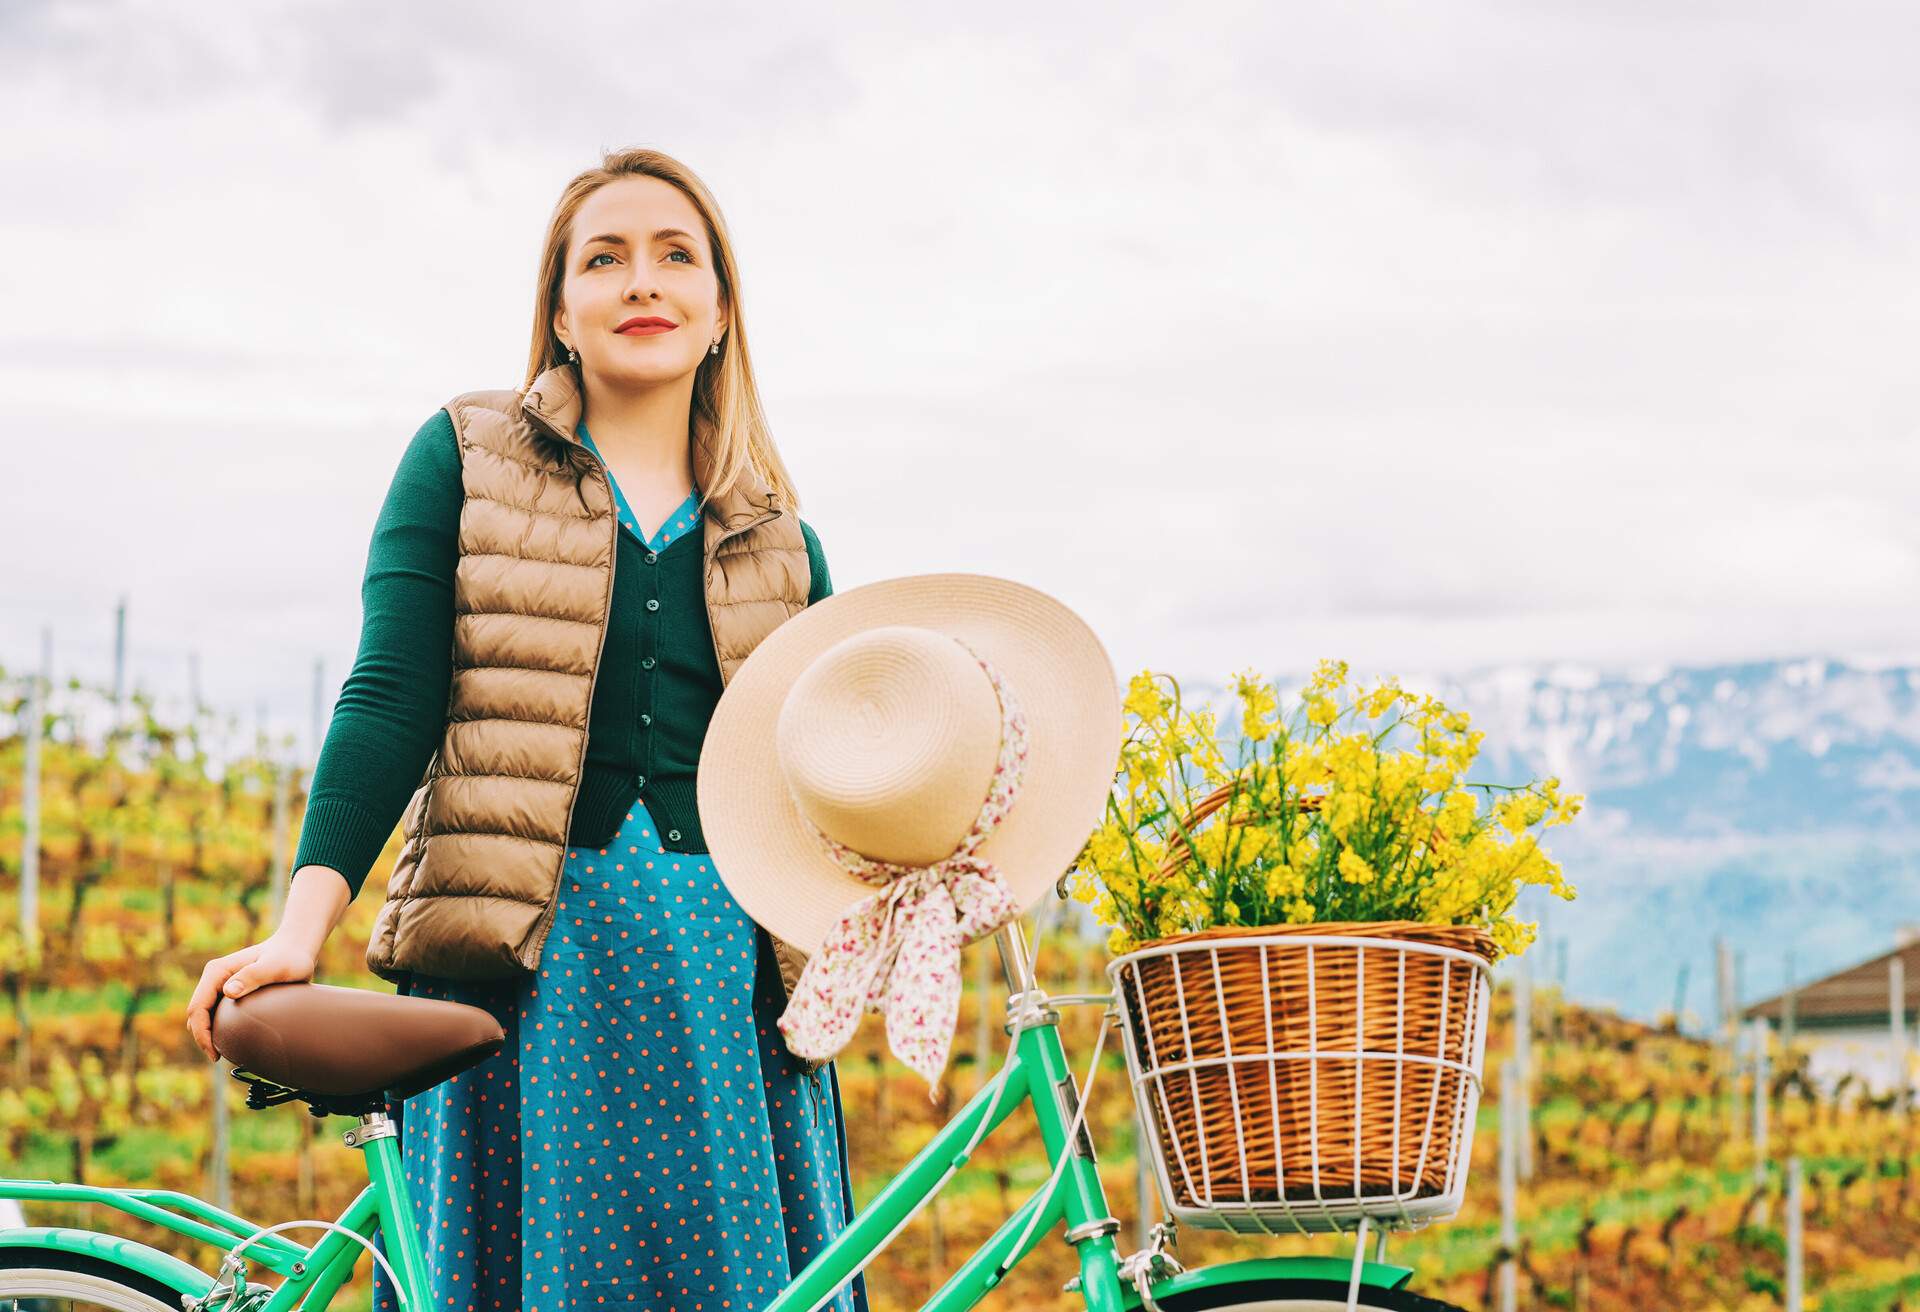 Retro styled portrait of beautiful young woman, wearing vintage clothes, holding mint color bicycle with yellow flowers placed in basket